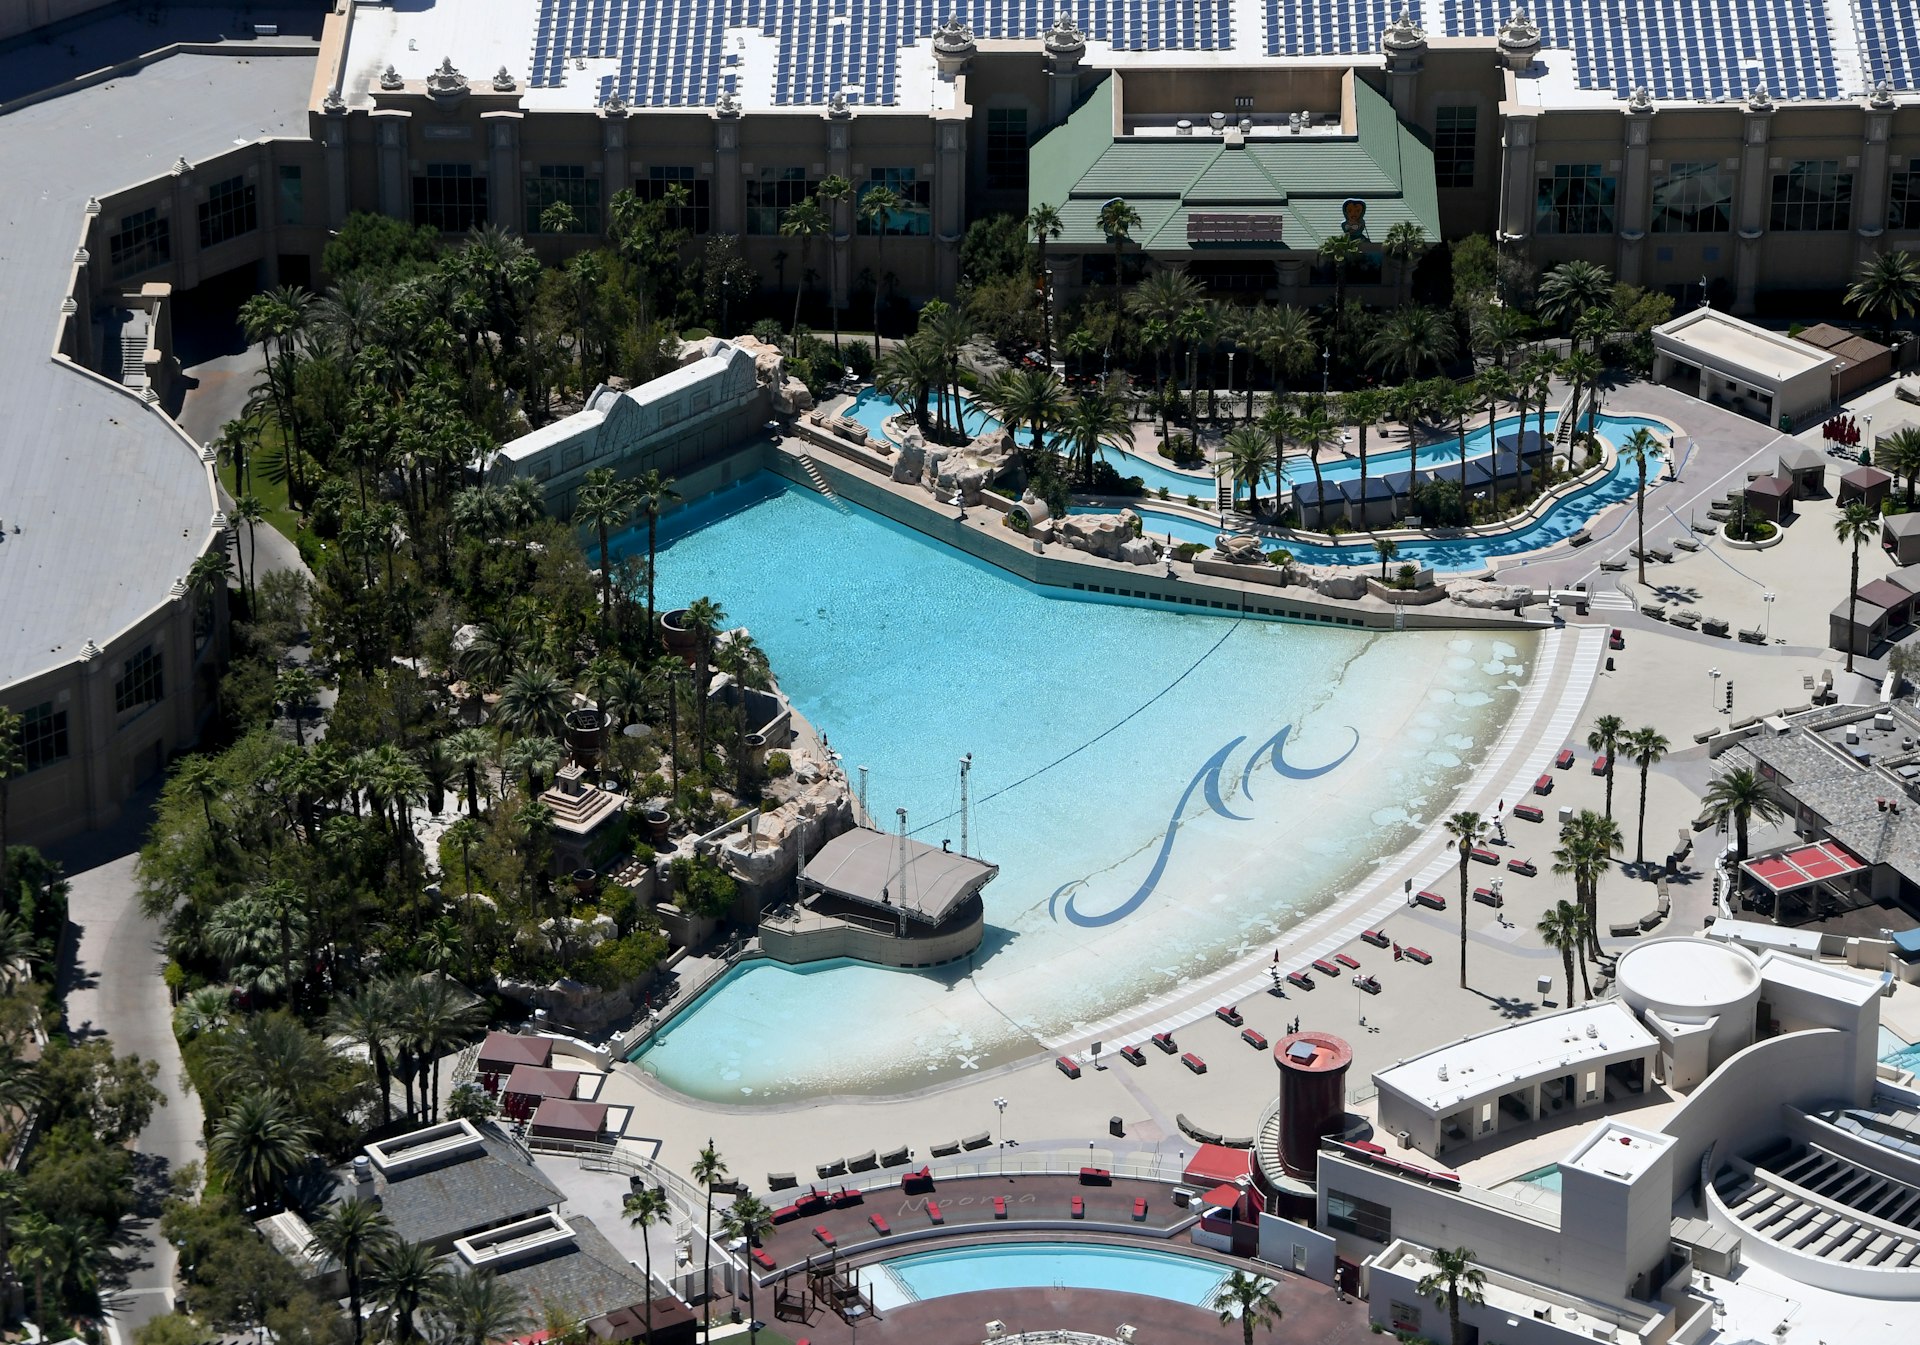 Aerial view of Mandalay Bay's manmade beach, which is a large fan-shaped pool. It's surrounded by palm trees and poolside cabanas. The back portion of the Mandalay Bay can also be seen. 